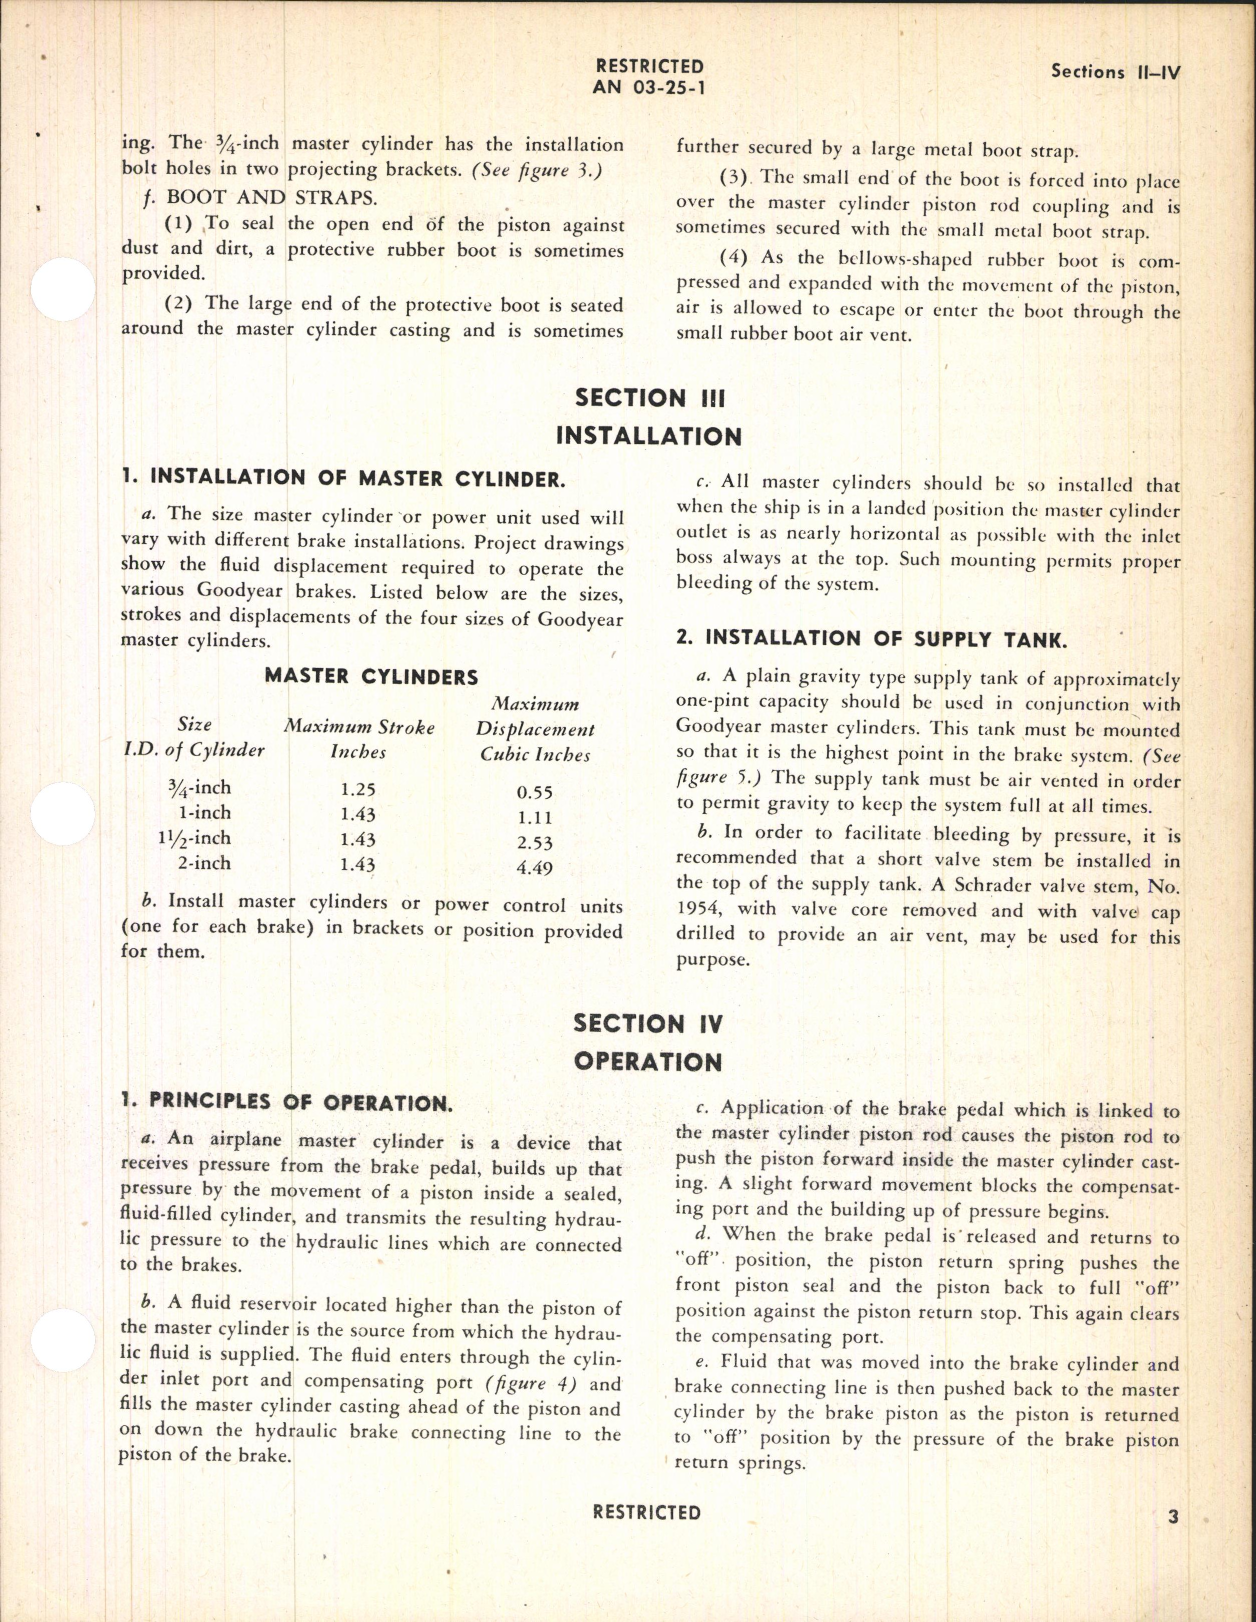 Sample page 7 from AirCorps Library document: Handbook of Instructions with Parts Catalog for Master Brake Cylinders (Goodyear)